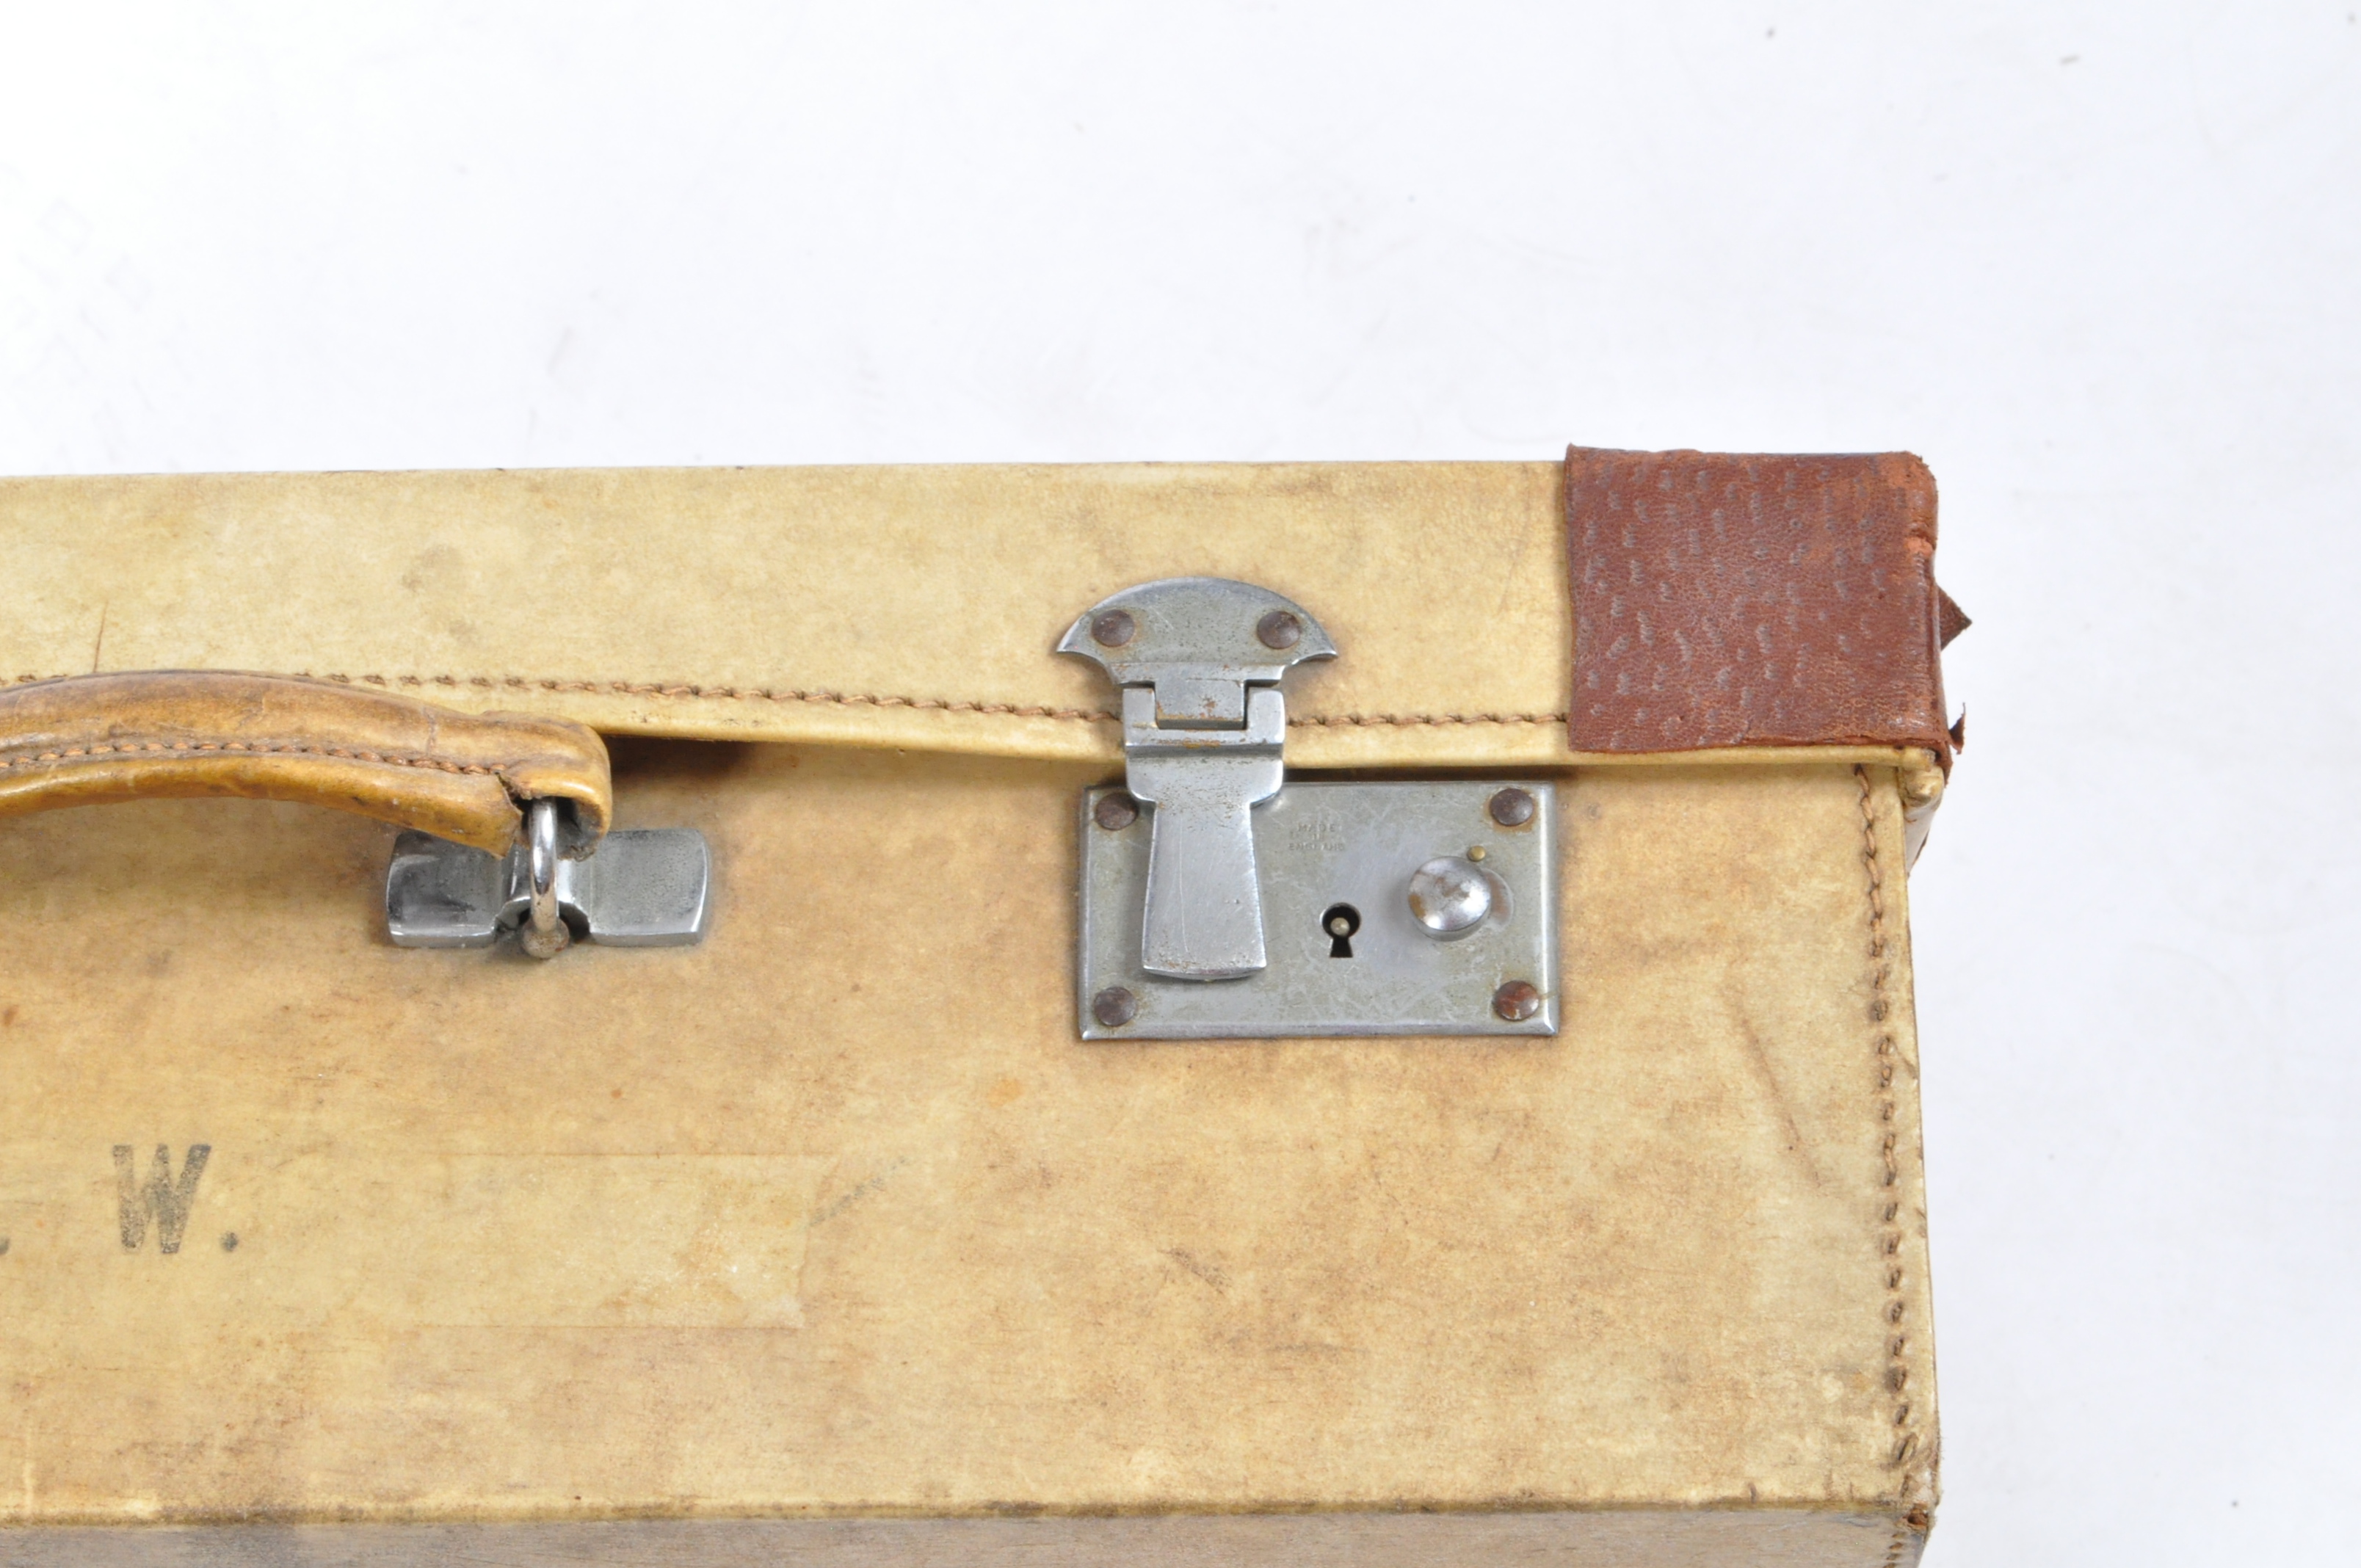 COLLECTION OF VINTAGE LUGGAGE - LEATHER SUITCASES - Image 8 of 14